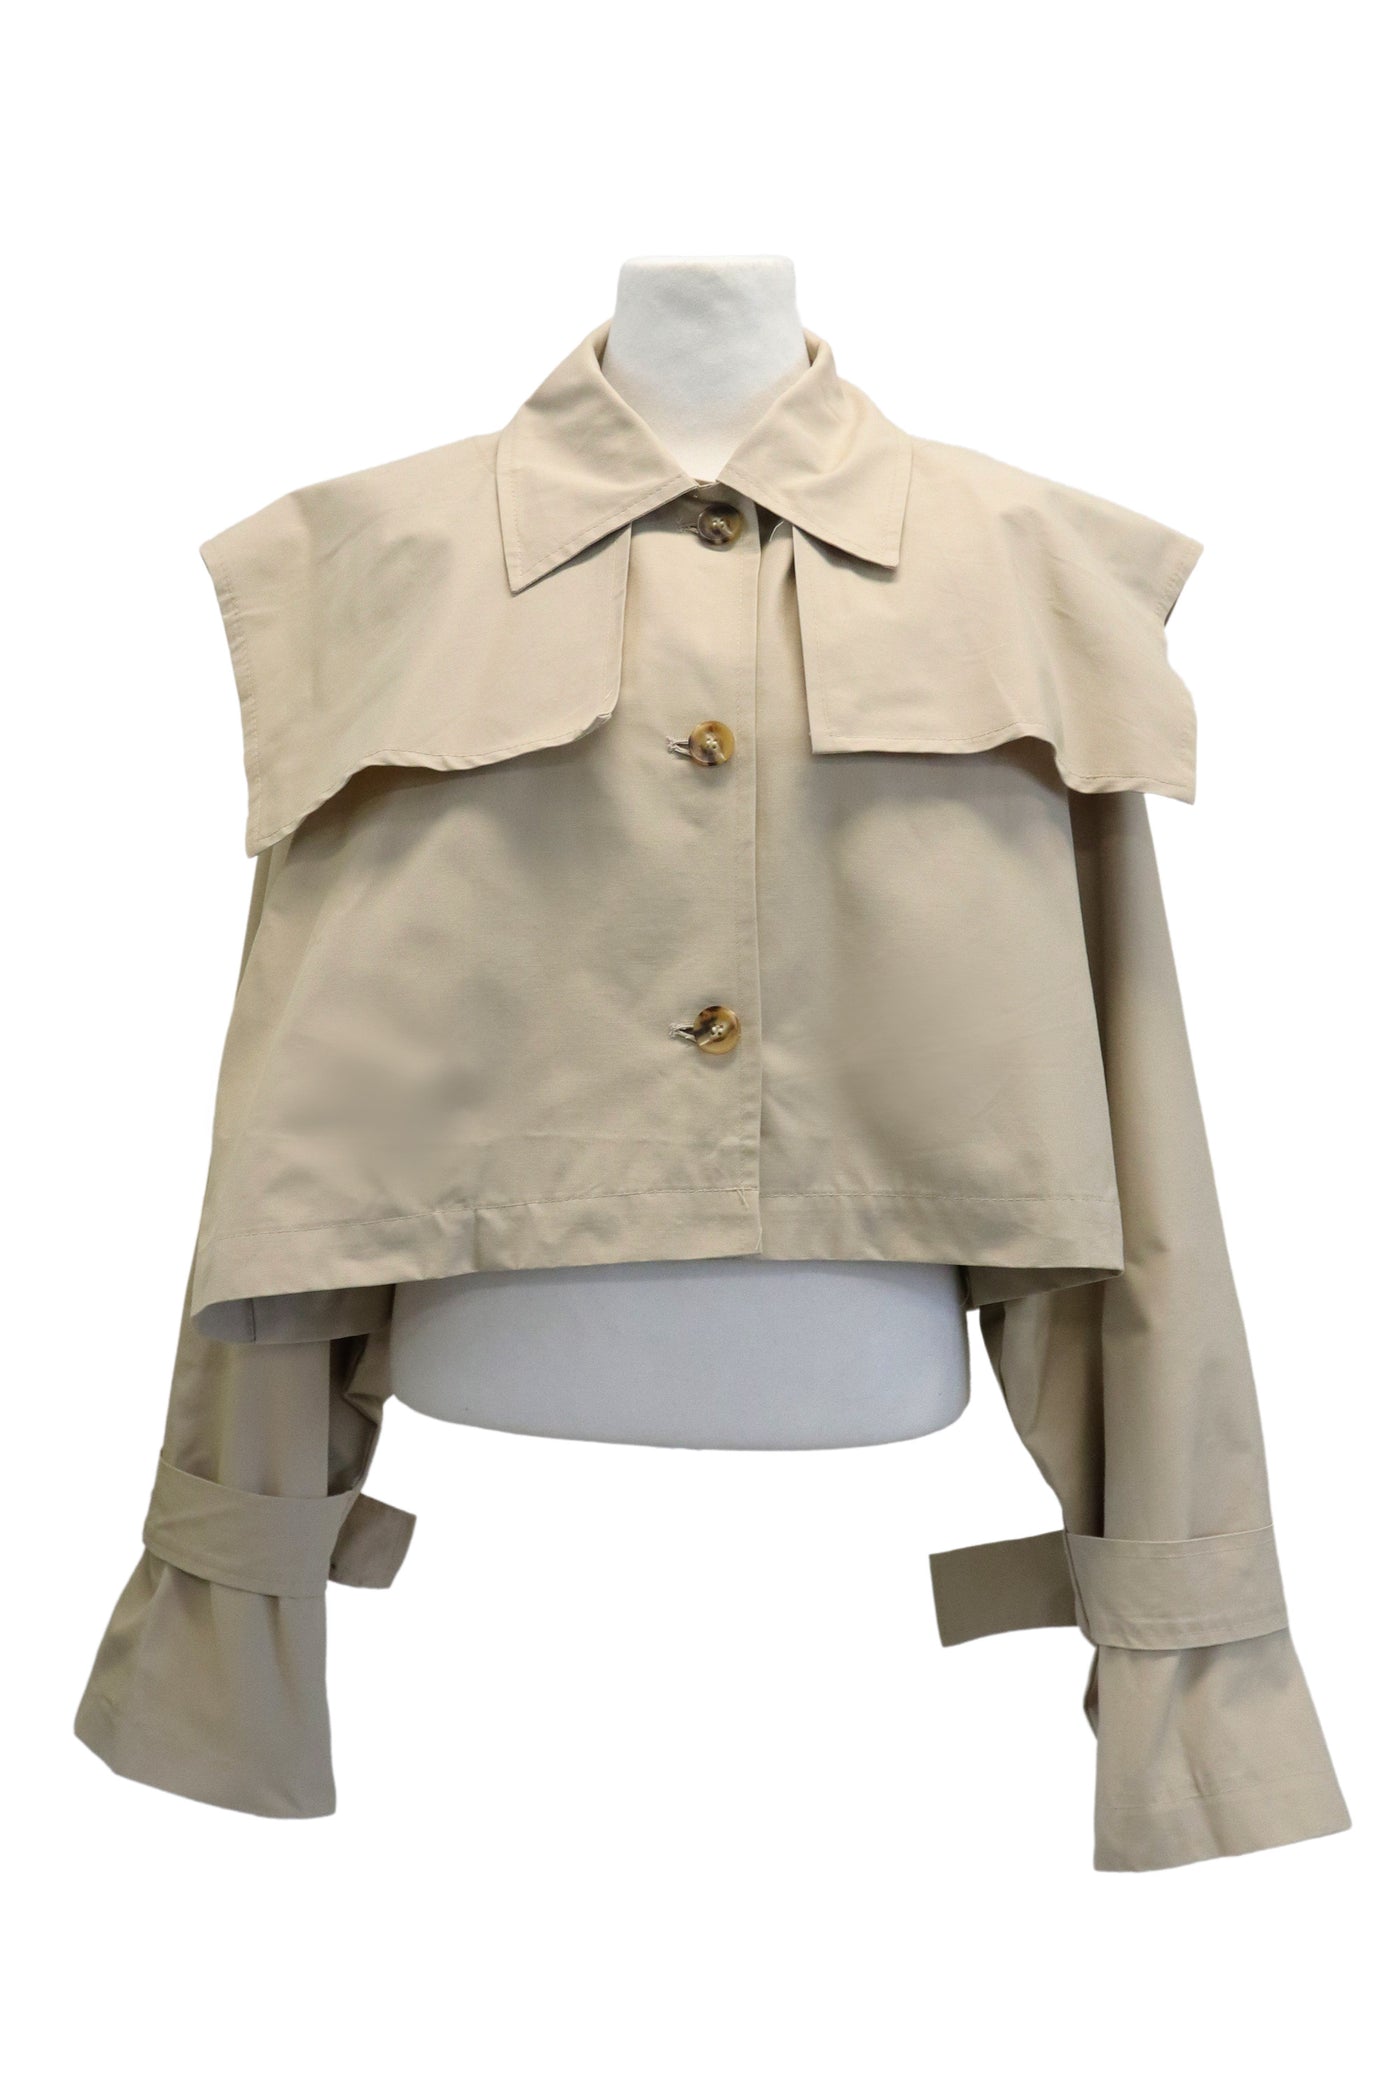 storets.com Kelcey Trench Jacket